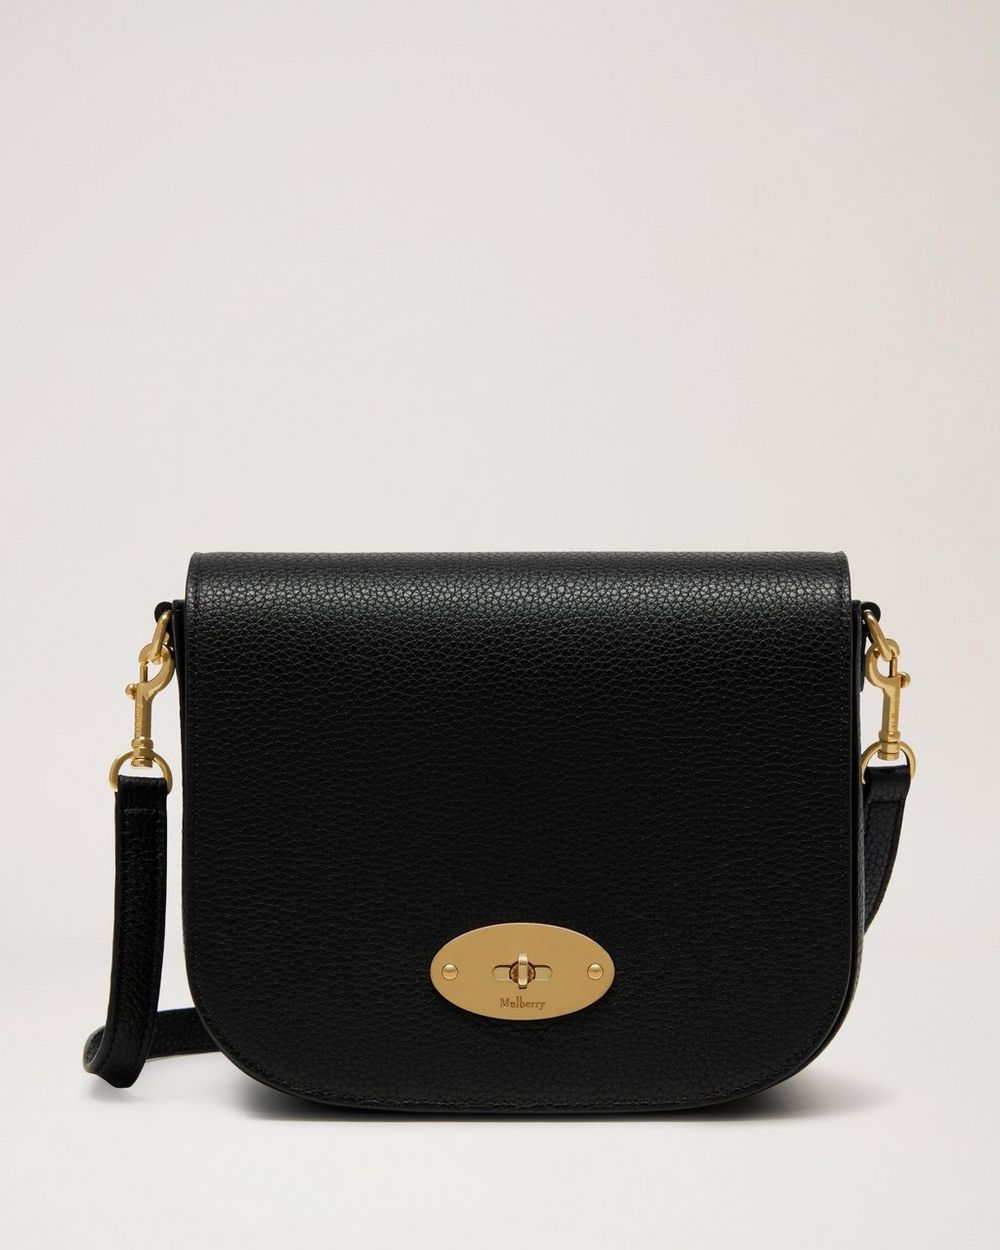 Darley Satchel | Black Small Classic | Mulberry